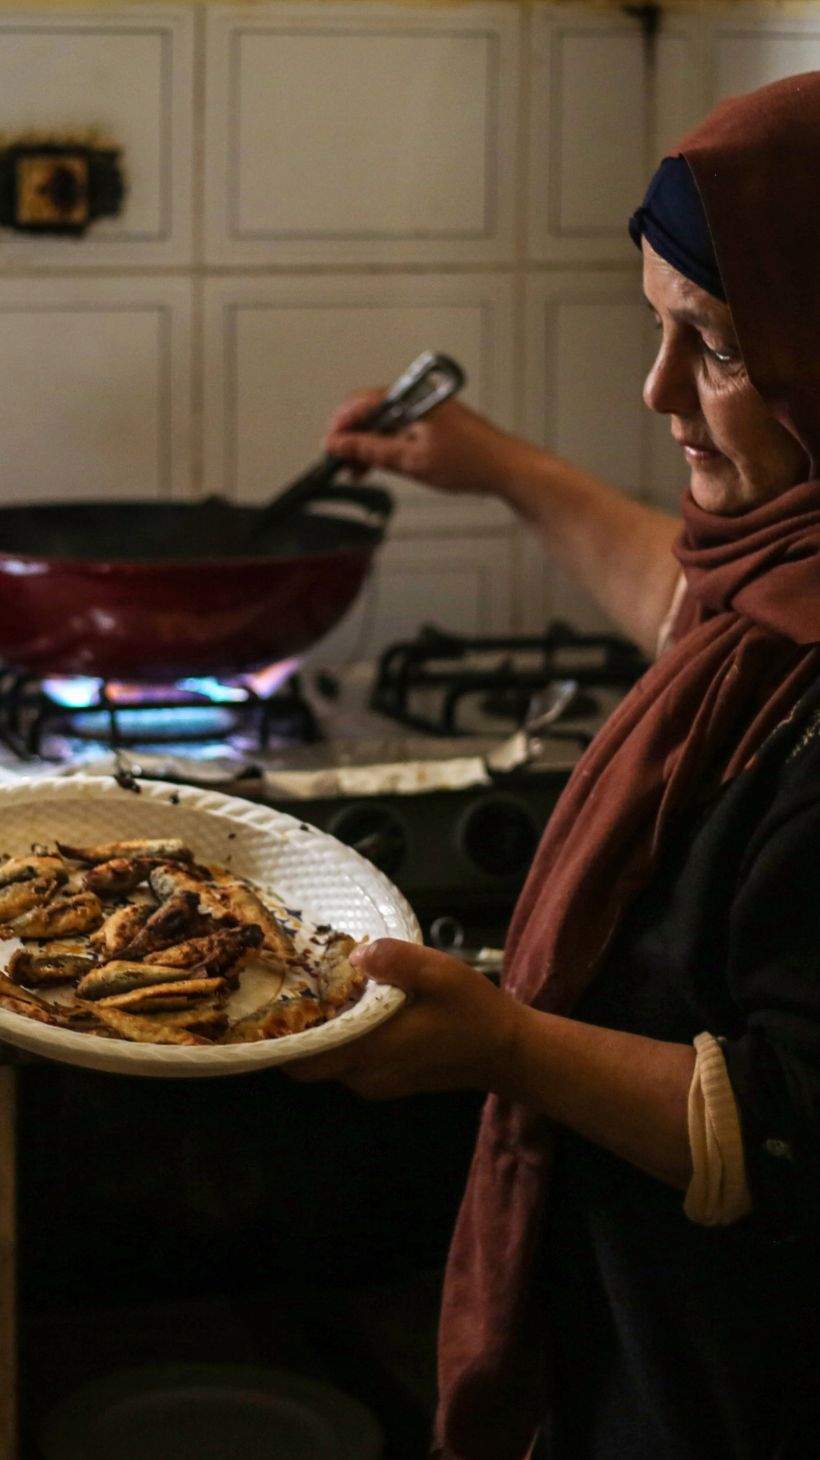 Khadr's mother stands by the stove lifting hot, freshly fried sardines out of a wok and onto a plate